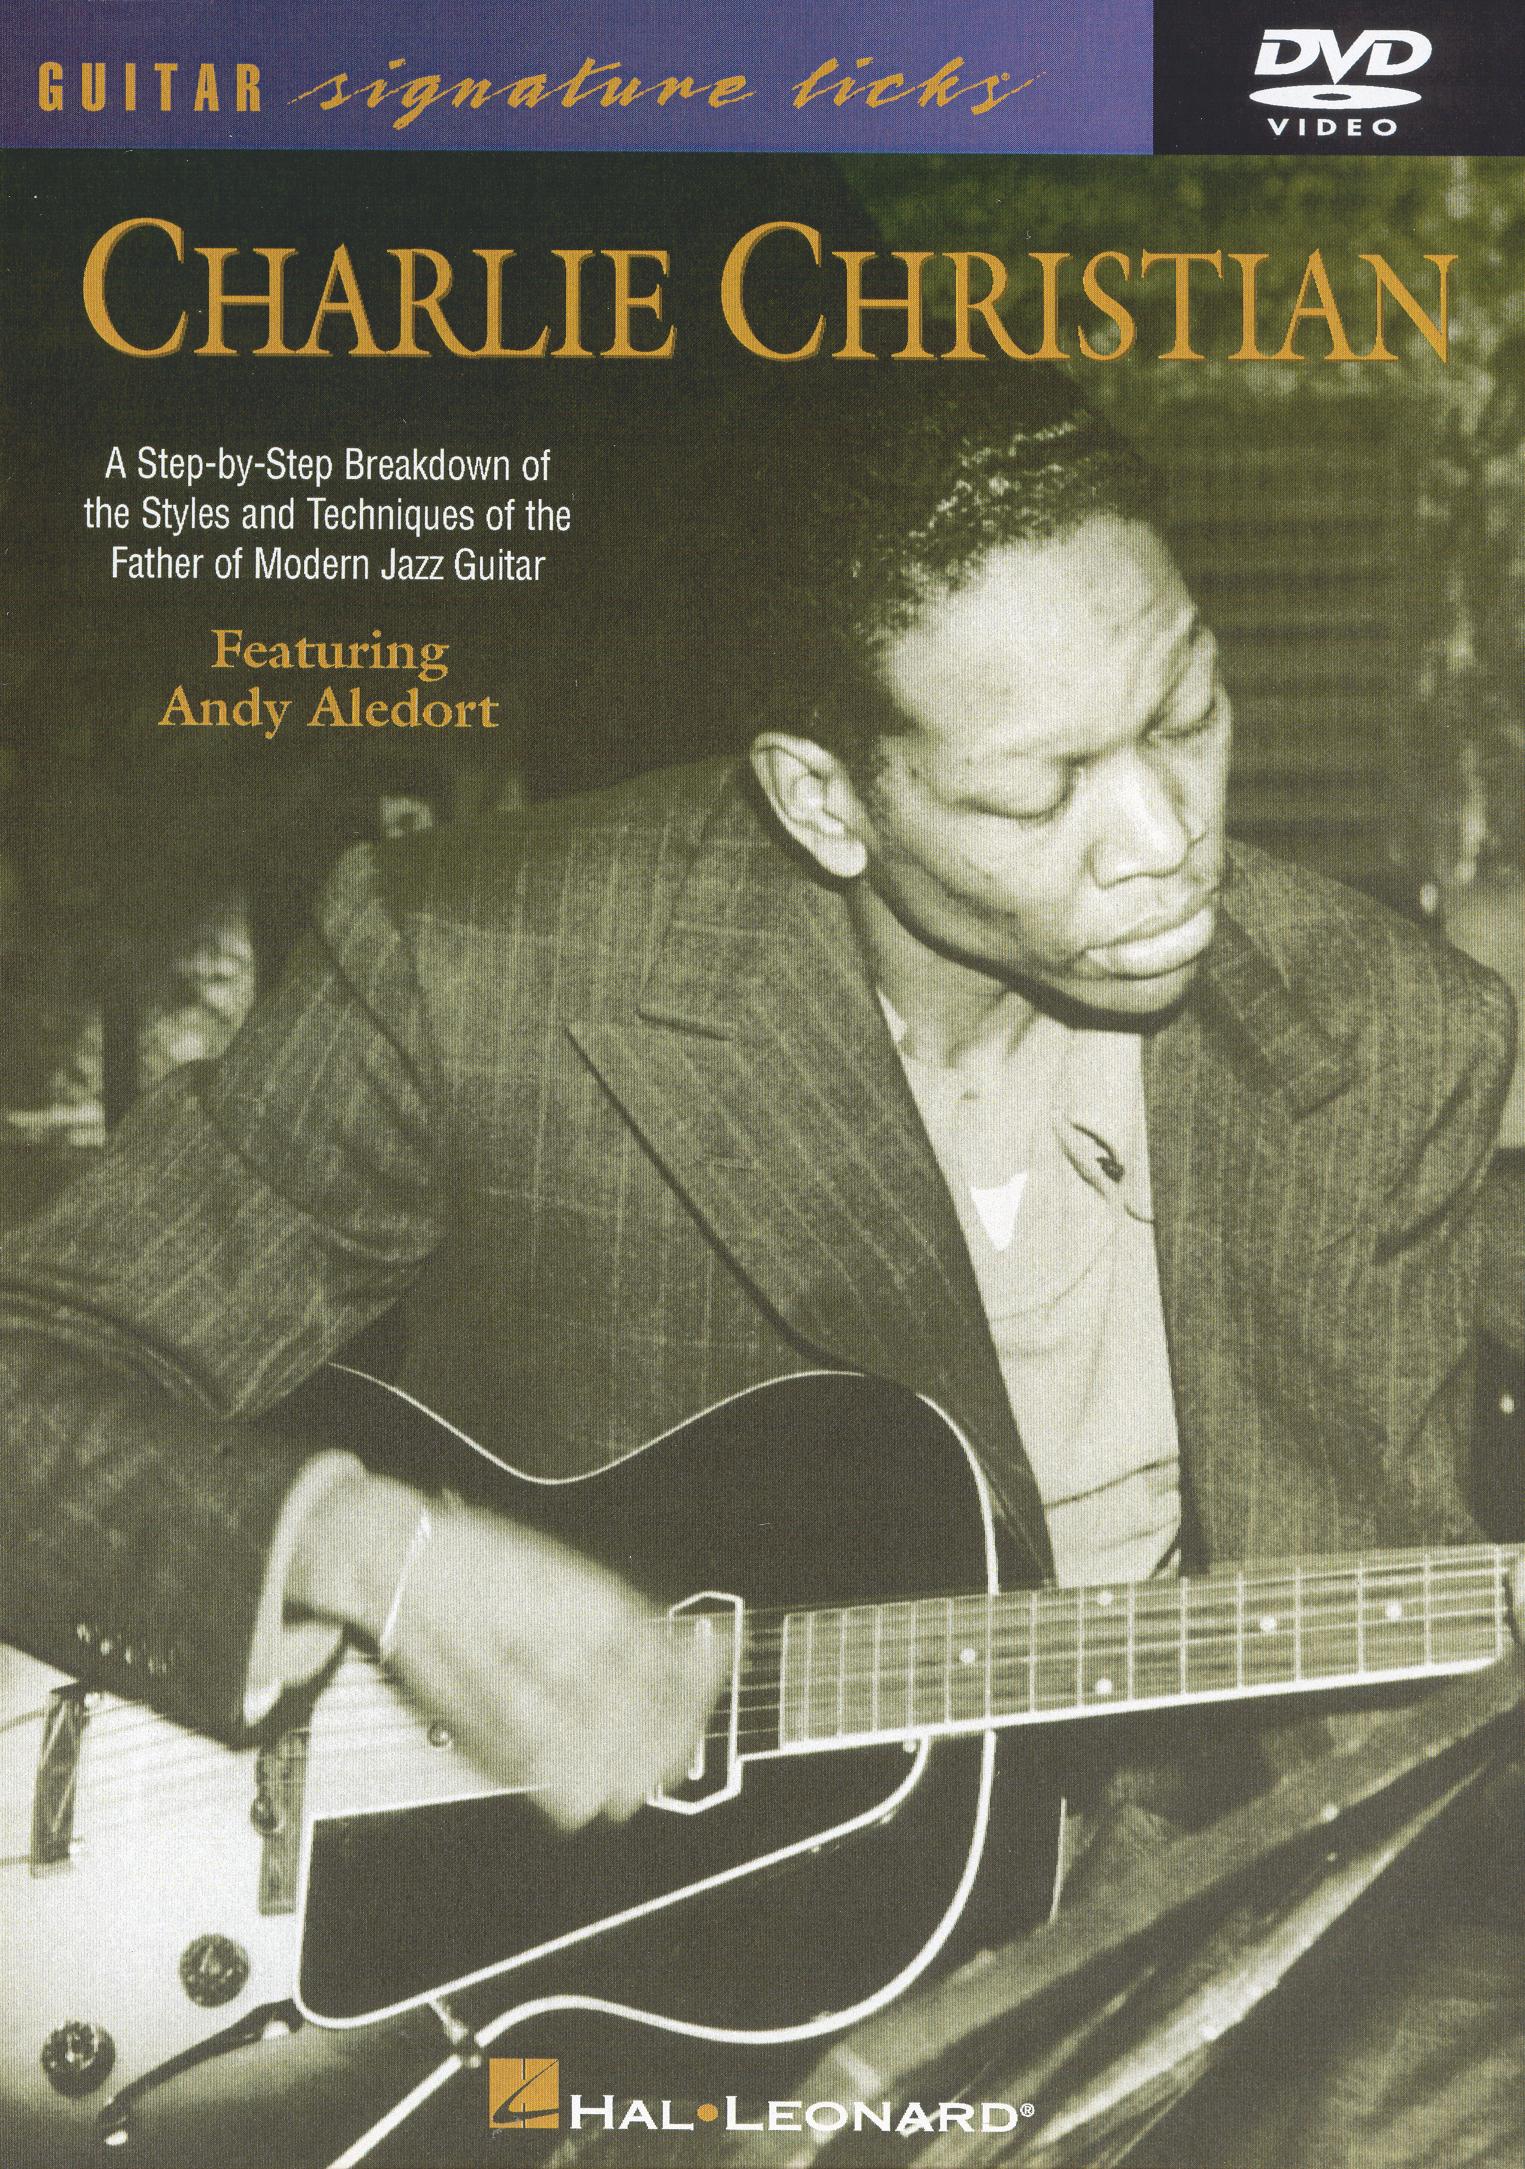 Best Buy: Charlie Christian Featuring Andy Aledort [DVD]